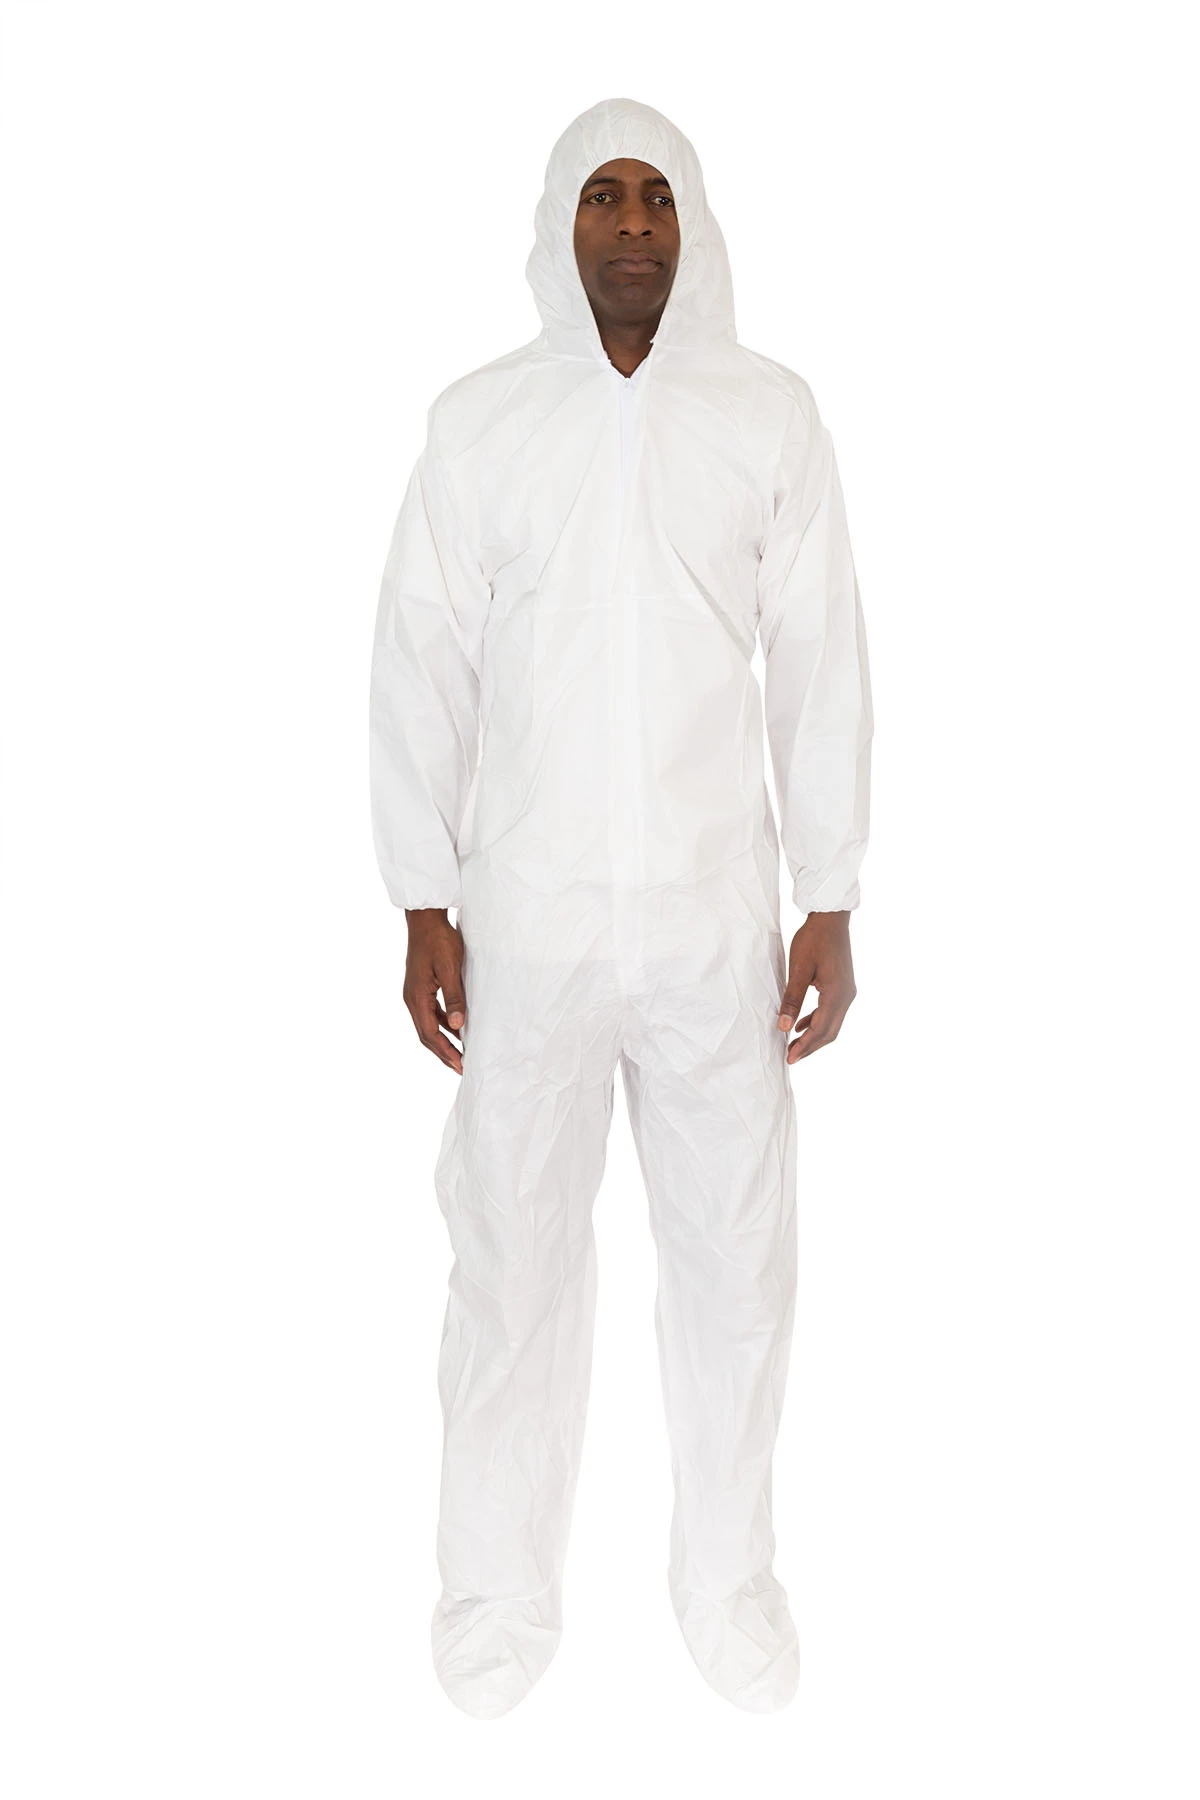 6 White Disposable Protective Heavy Duty Overall Coverall Boiler Suit Type 5 